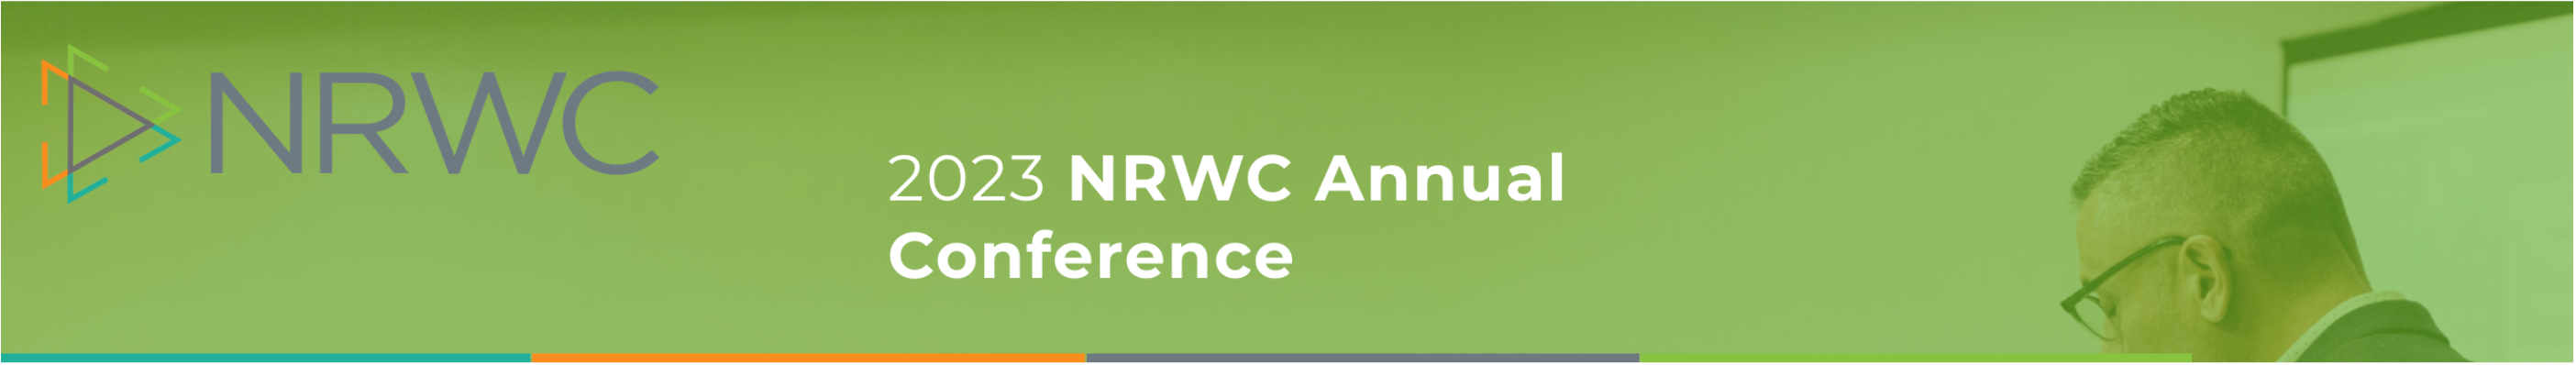 2023 NRWC Conference banner image